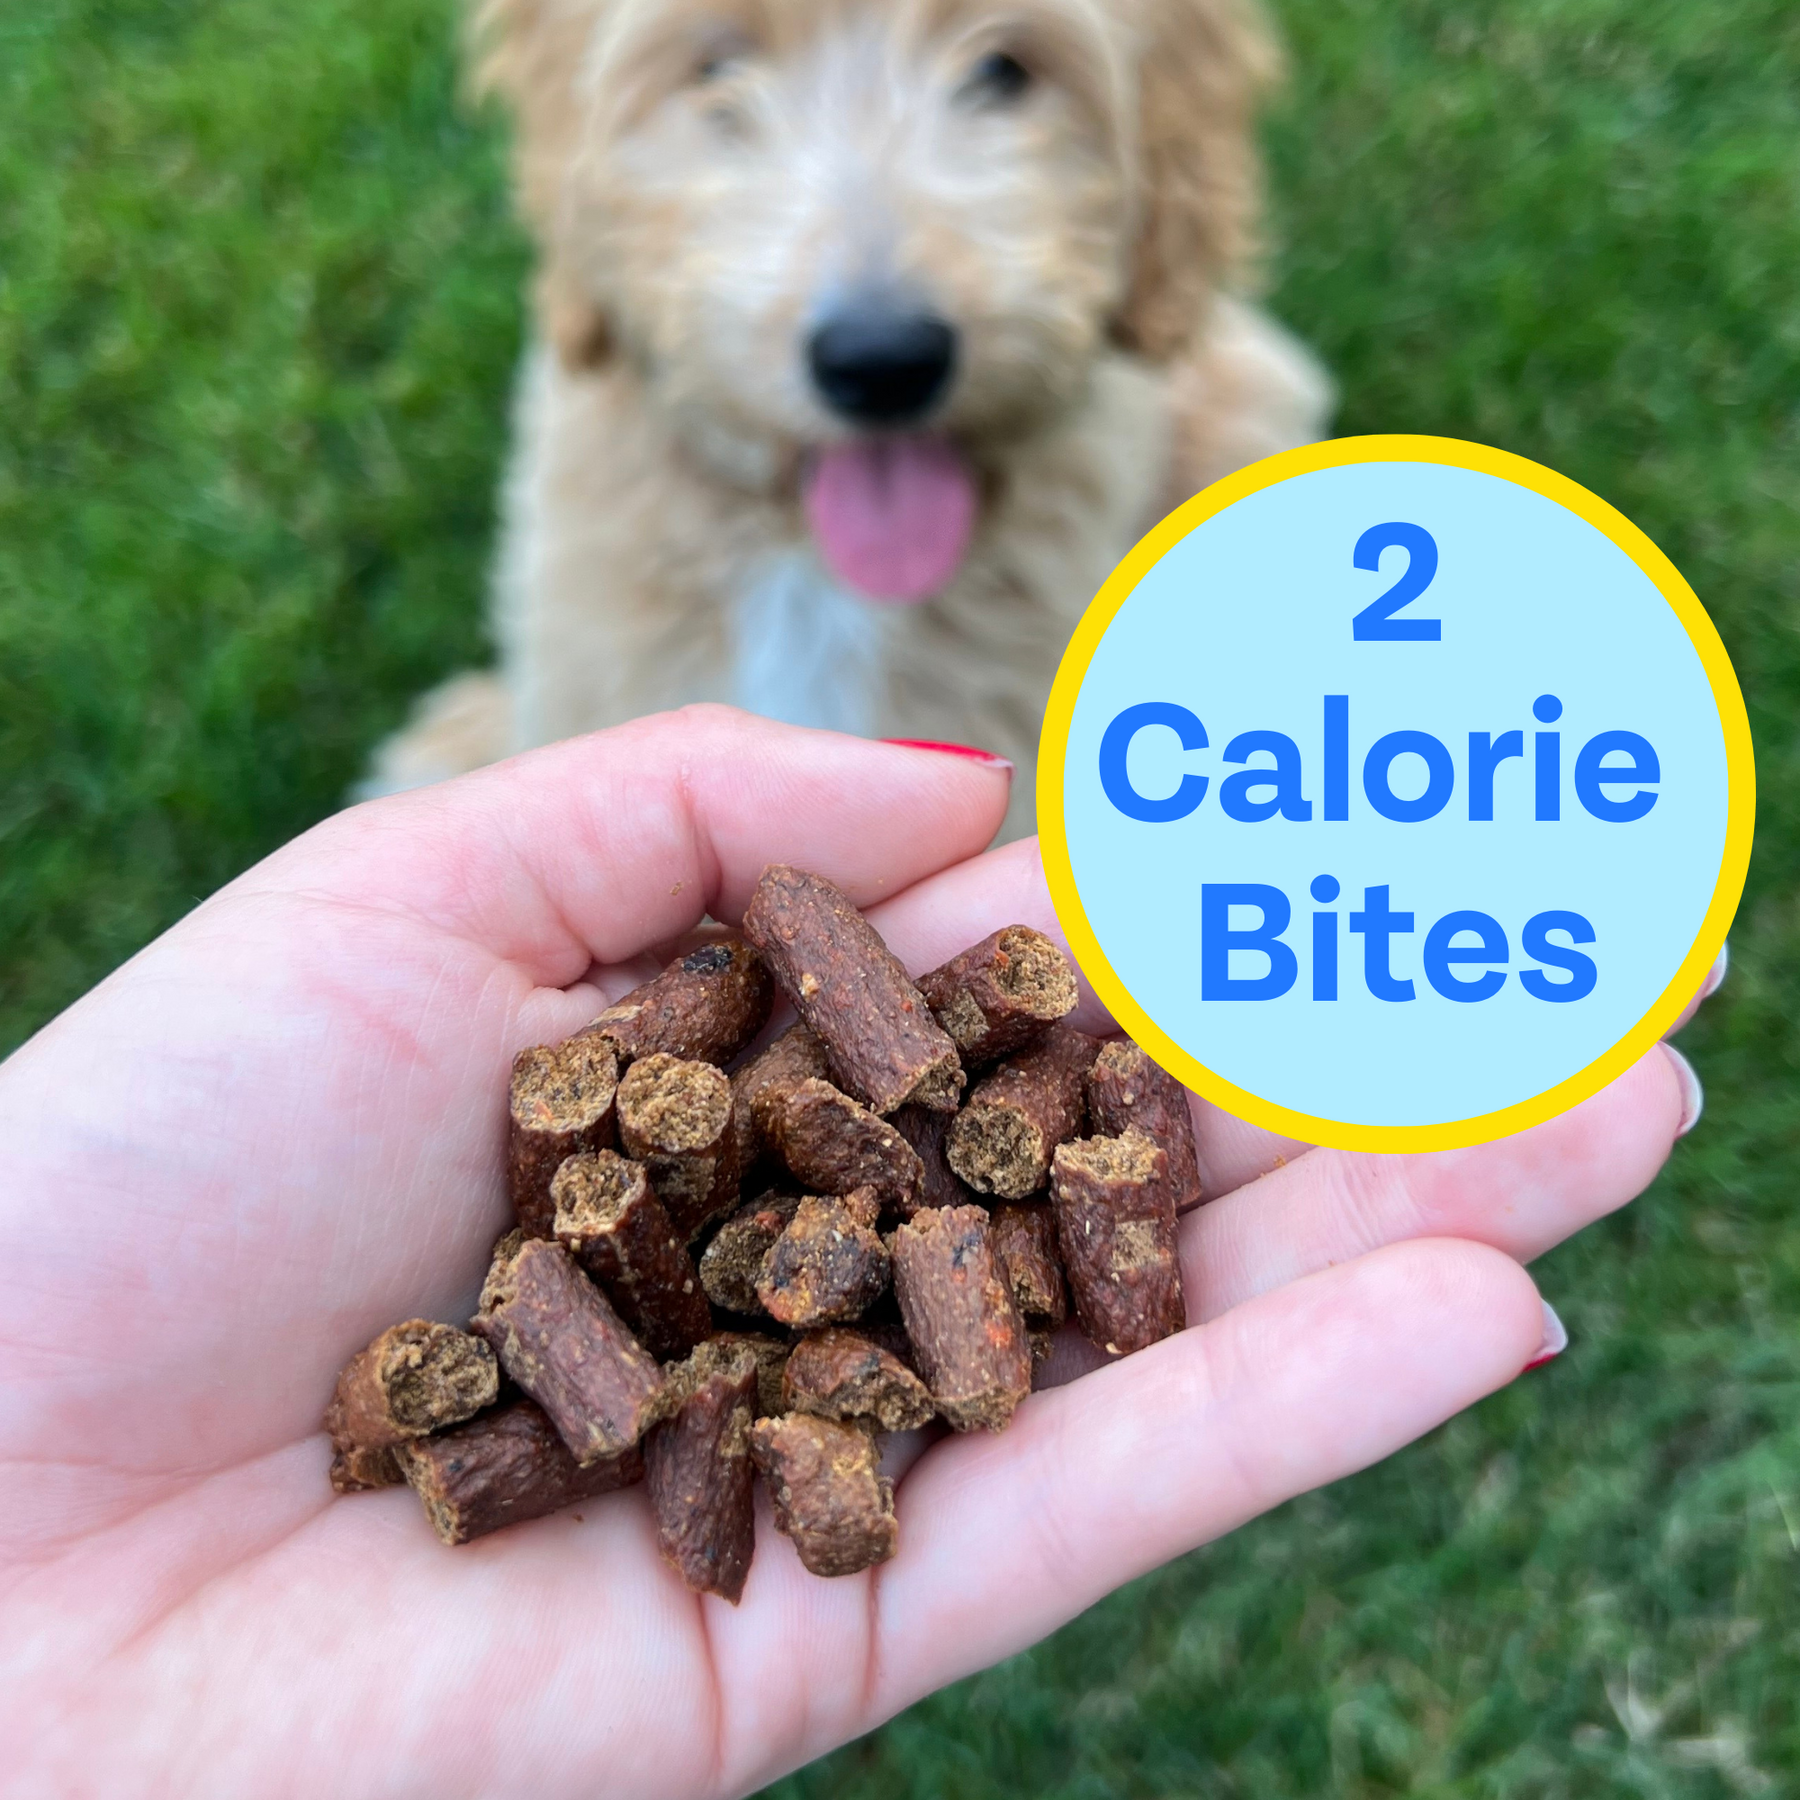 close up of the jerky treats and it says 2 calorie bites.